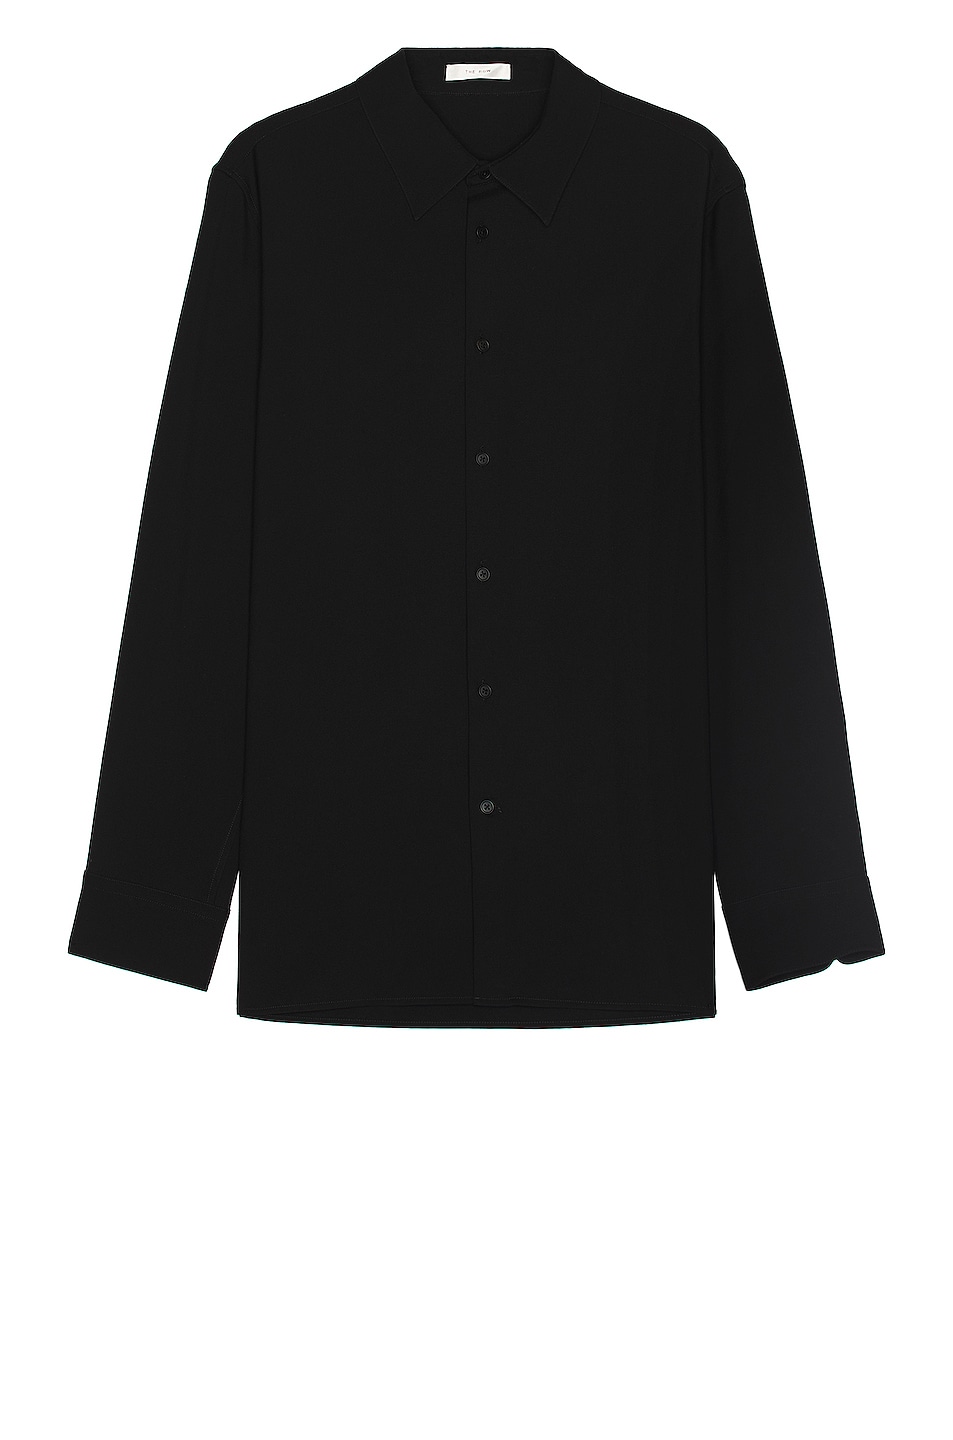 Image 1 of The Row Beto Shirt in Black